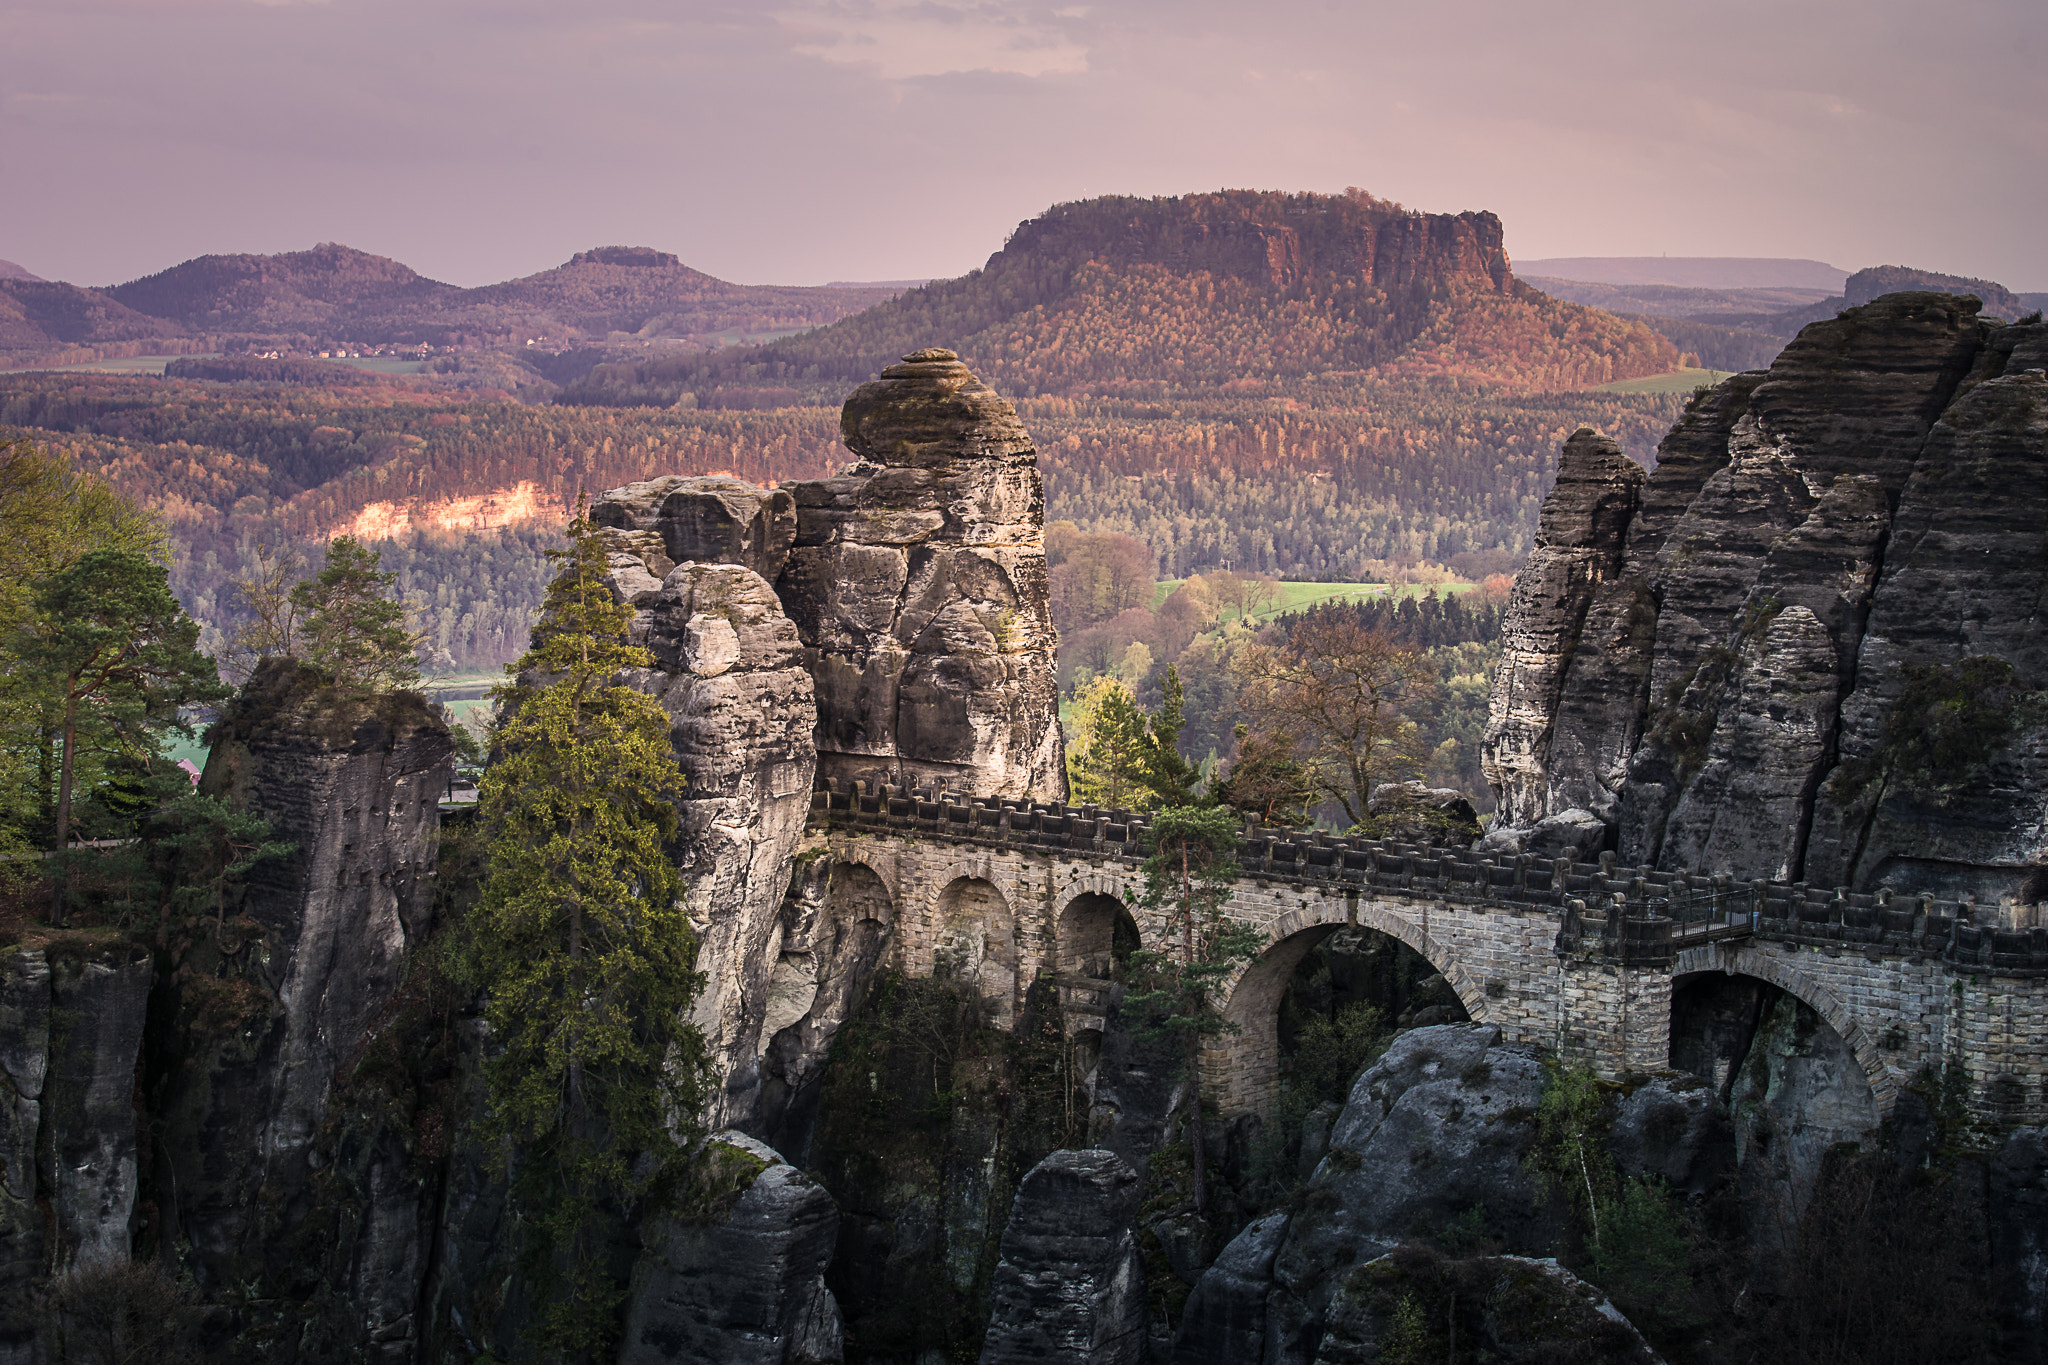 Sony a7 II sample photo. -evening mood at the bastei- photography